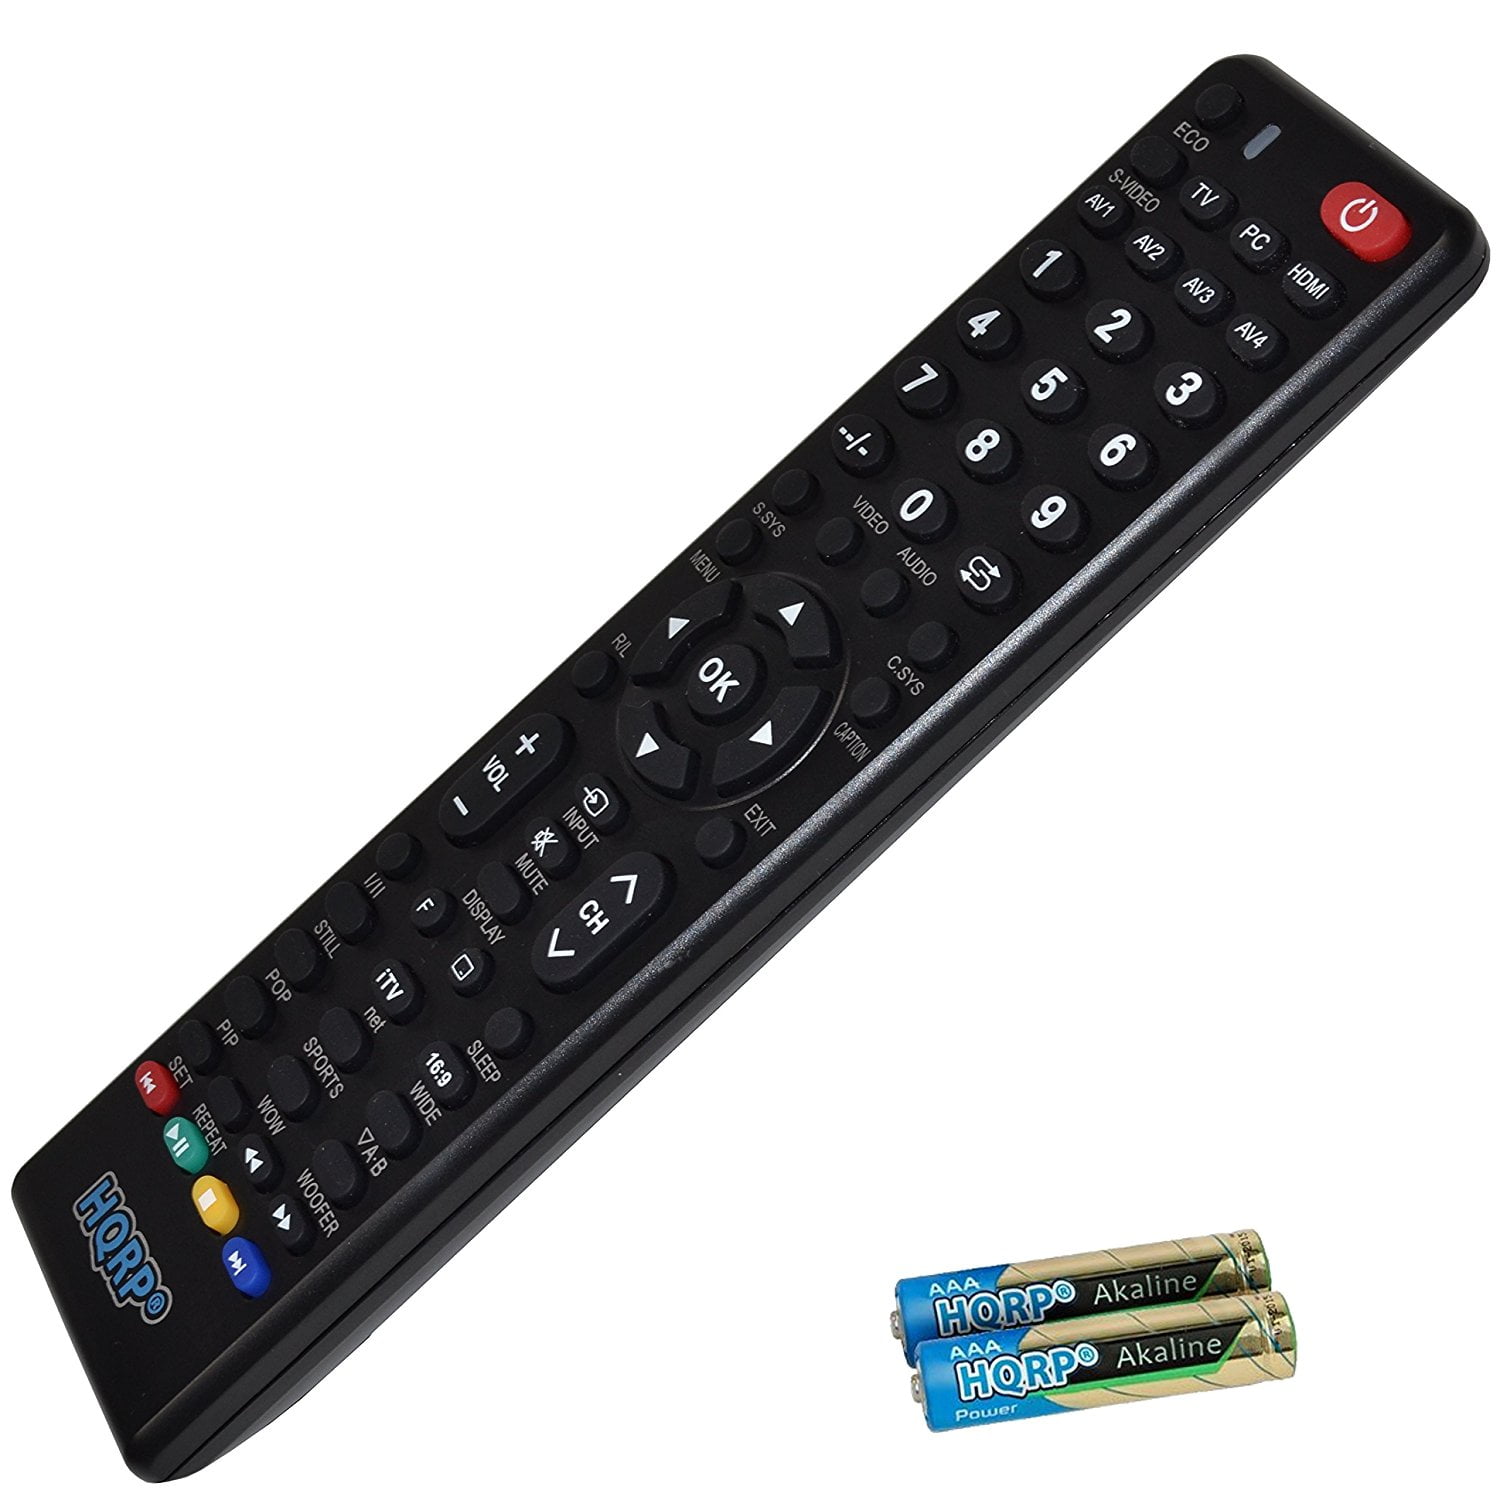 Remote Control for Sony TV KDL-26S3000 KDL26S3000 Remote Replacement 